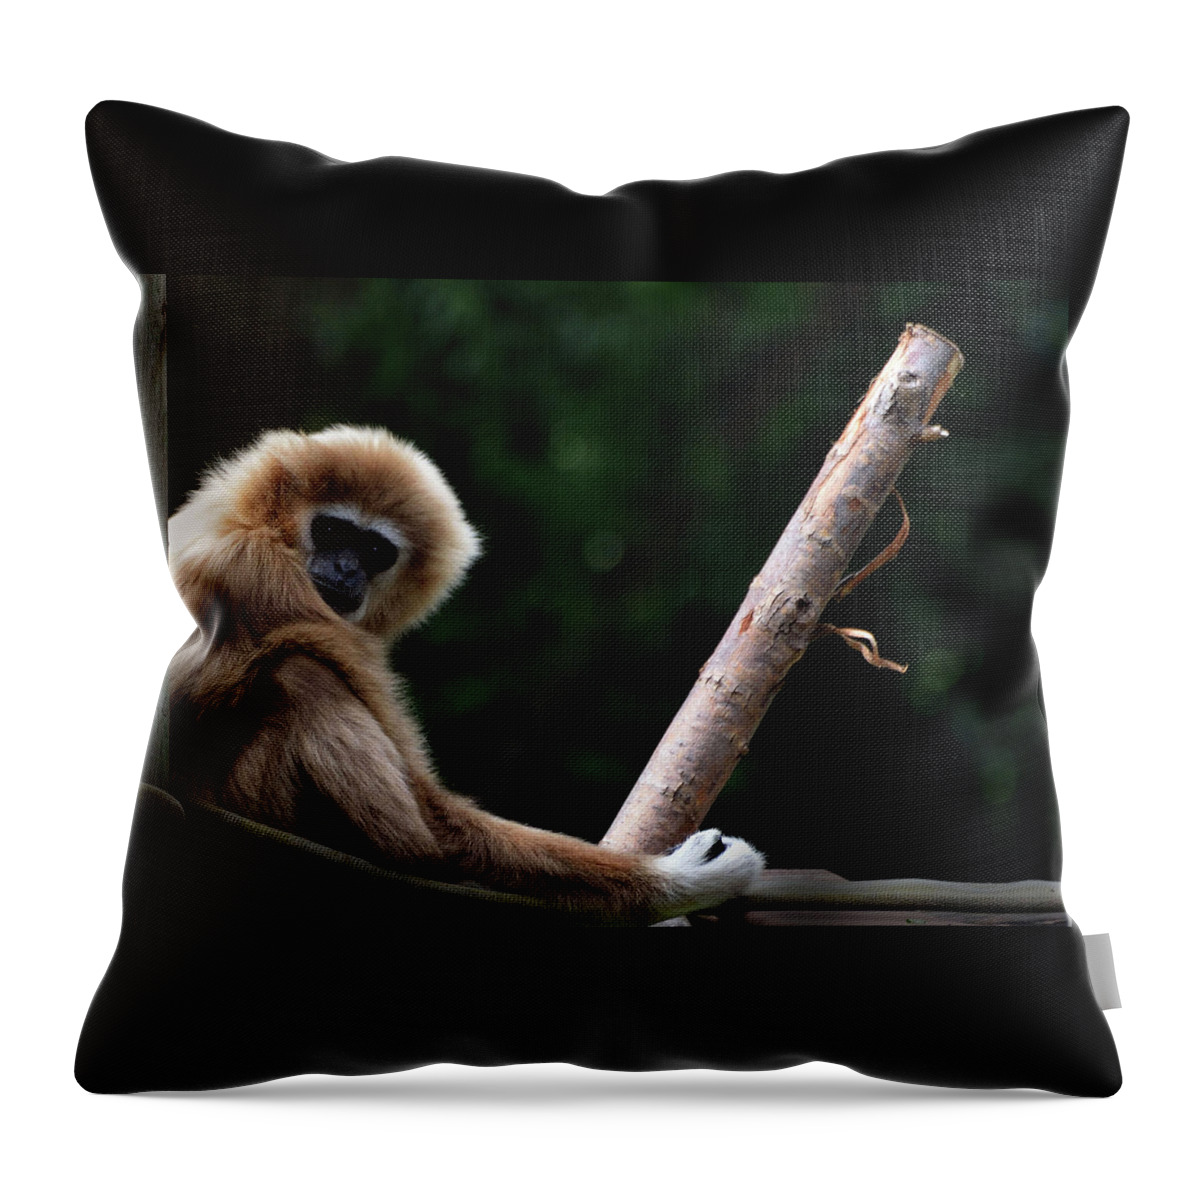 Gibbon Throw Pillow featuring the photograph Watching by Kathleen Stephens